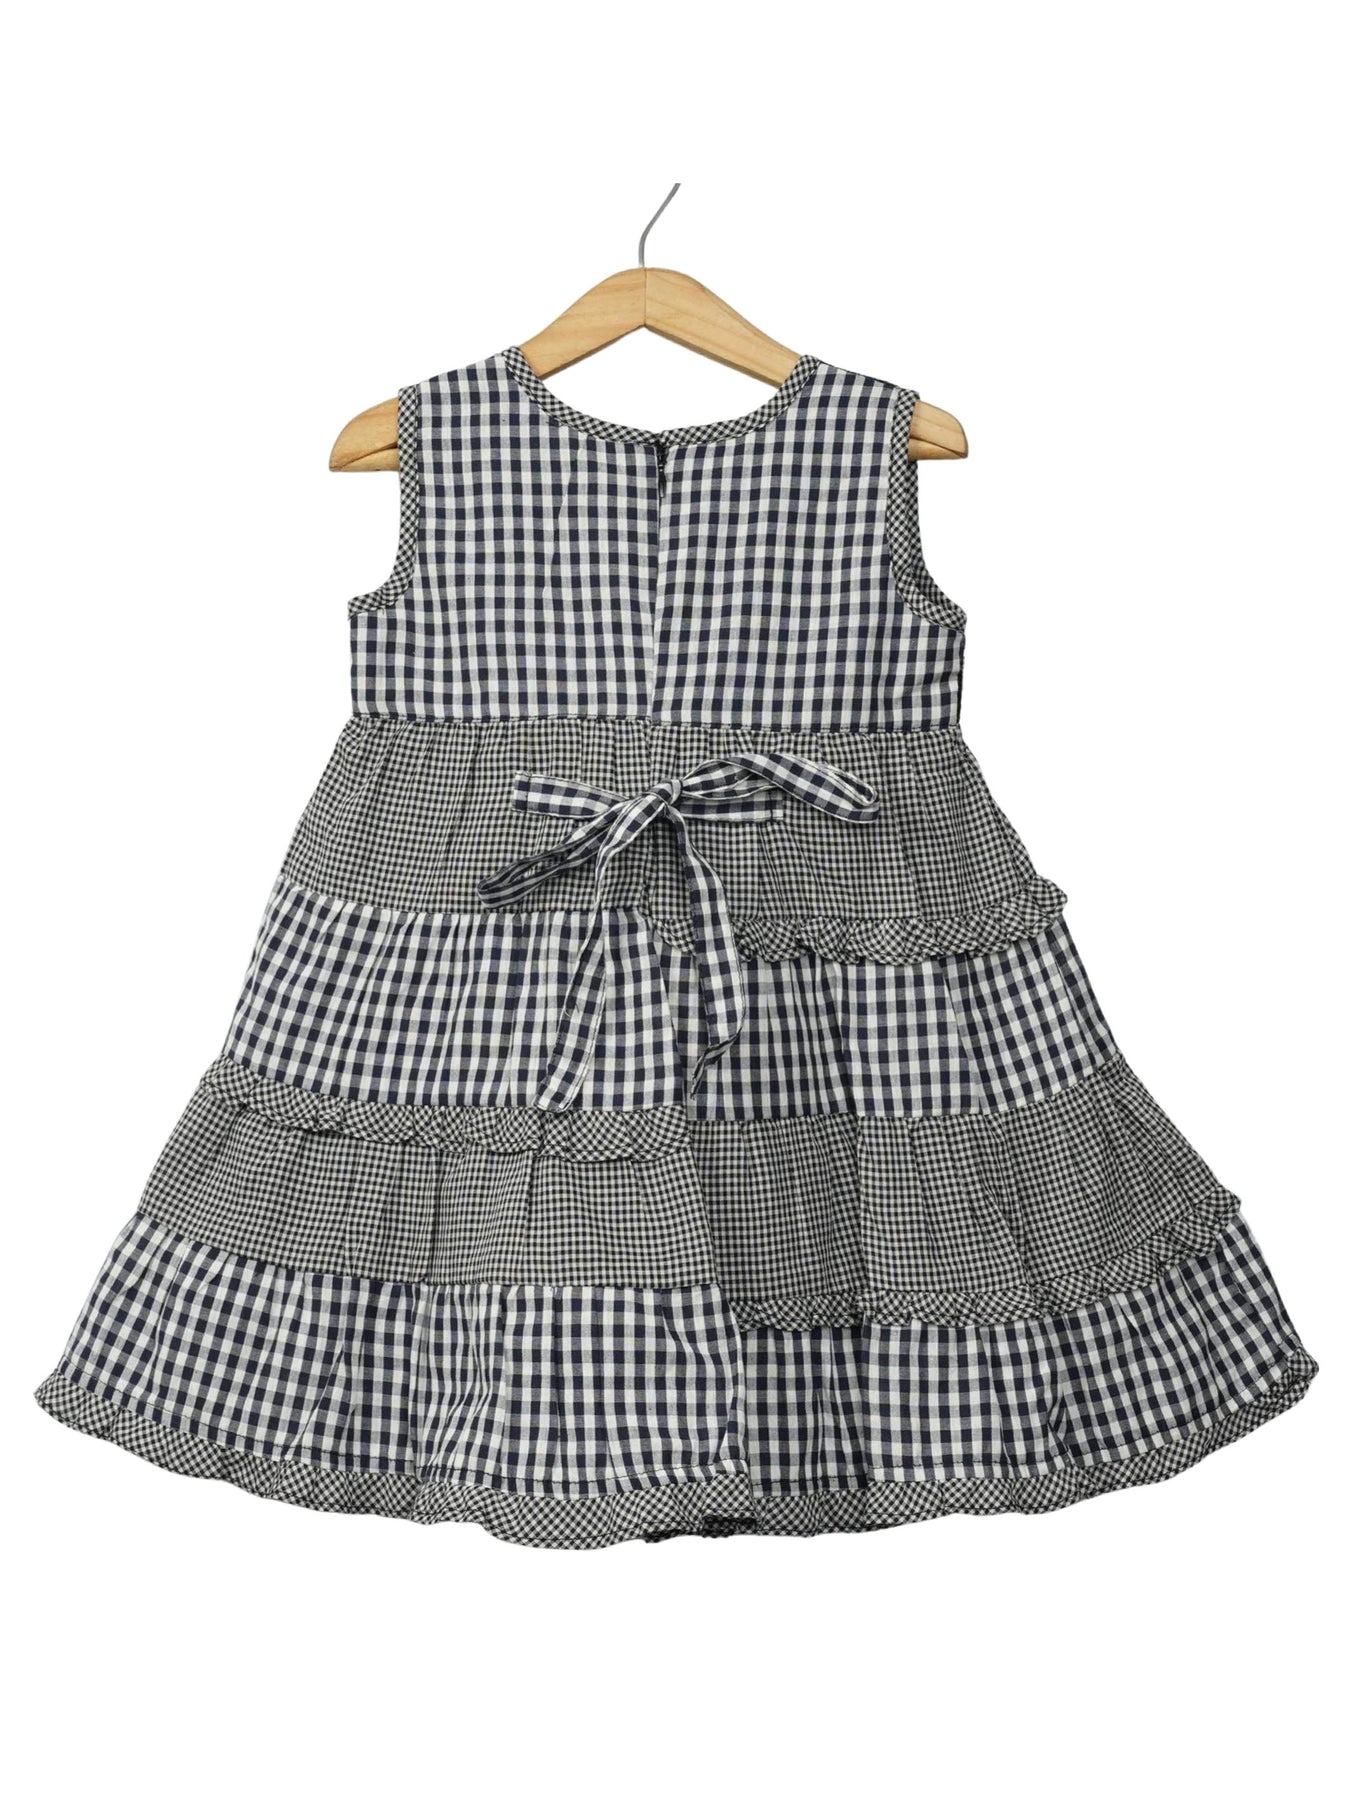 Buy White Baby Dress Online In India  Etsy India